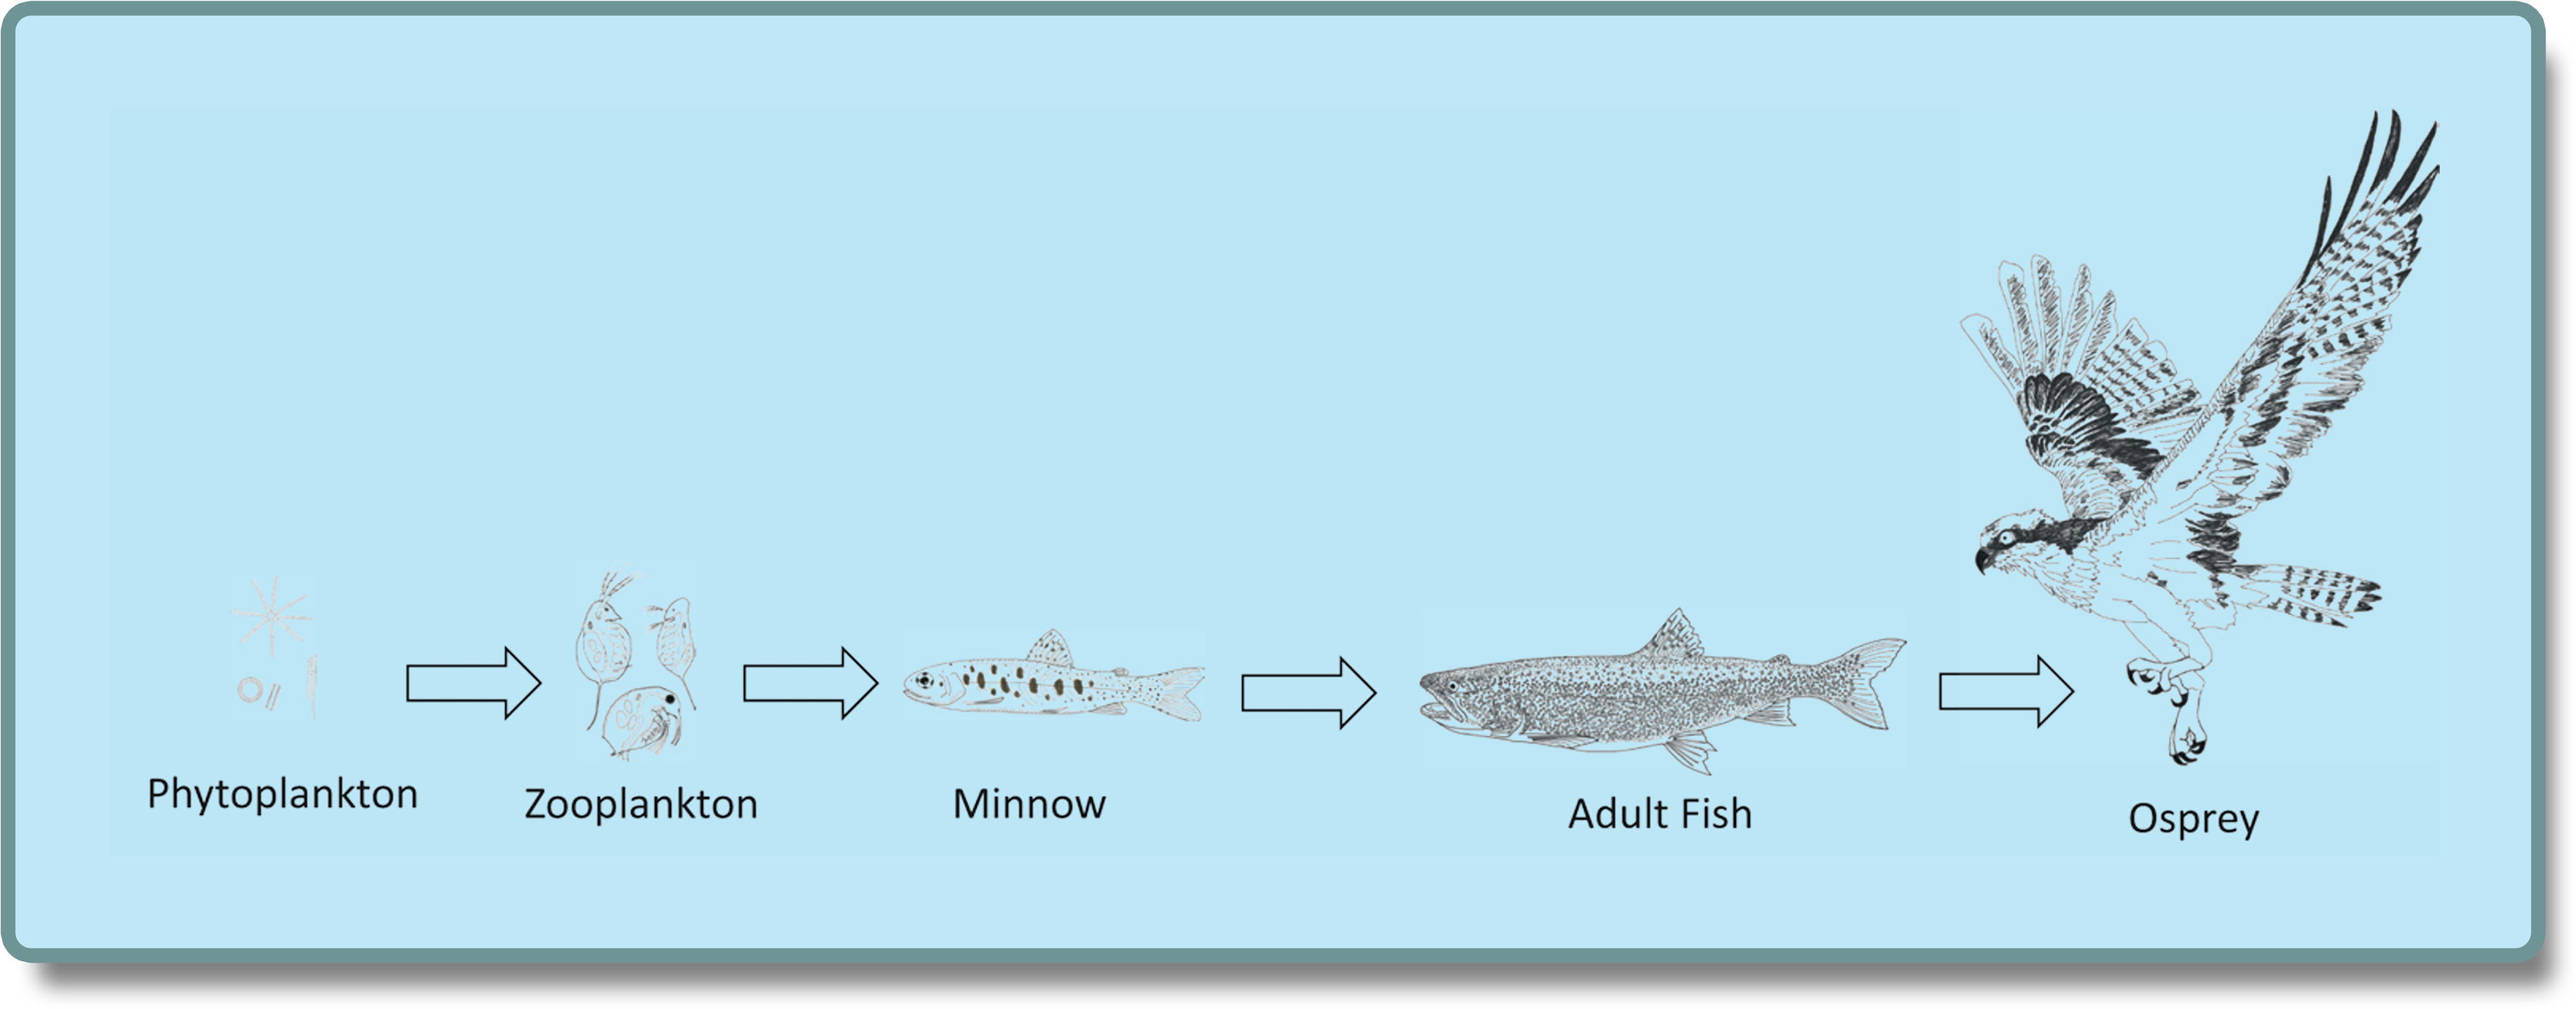 A Fish Evolution From Adult To Adult